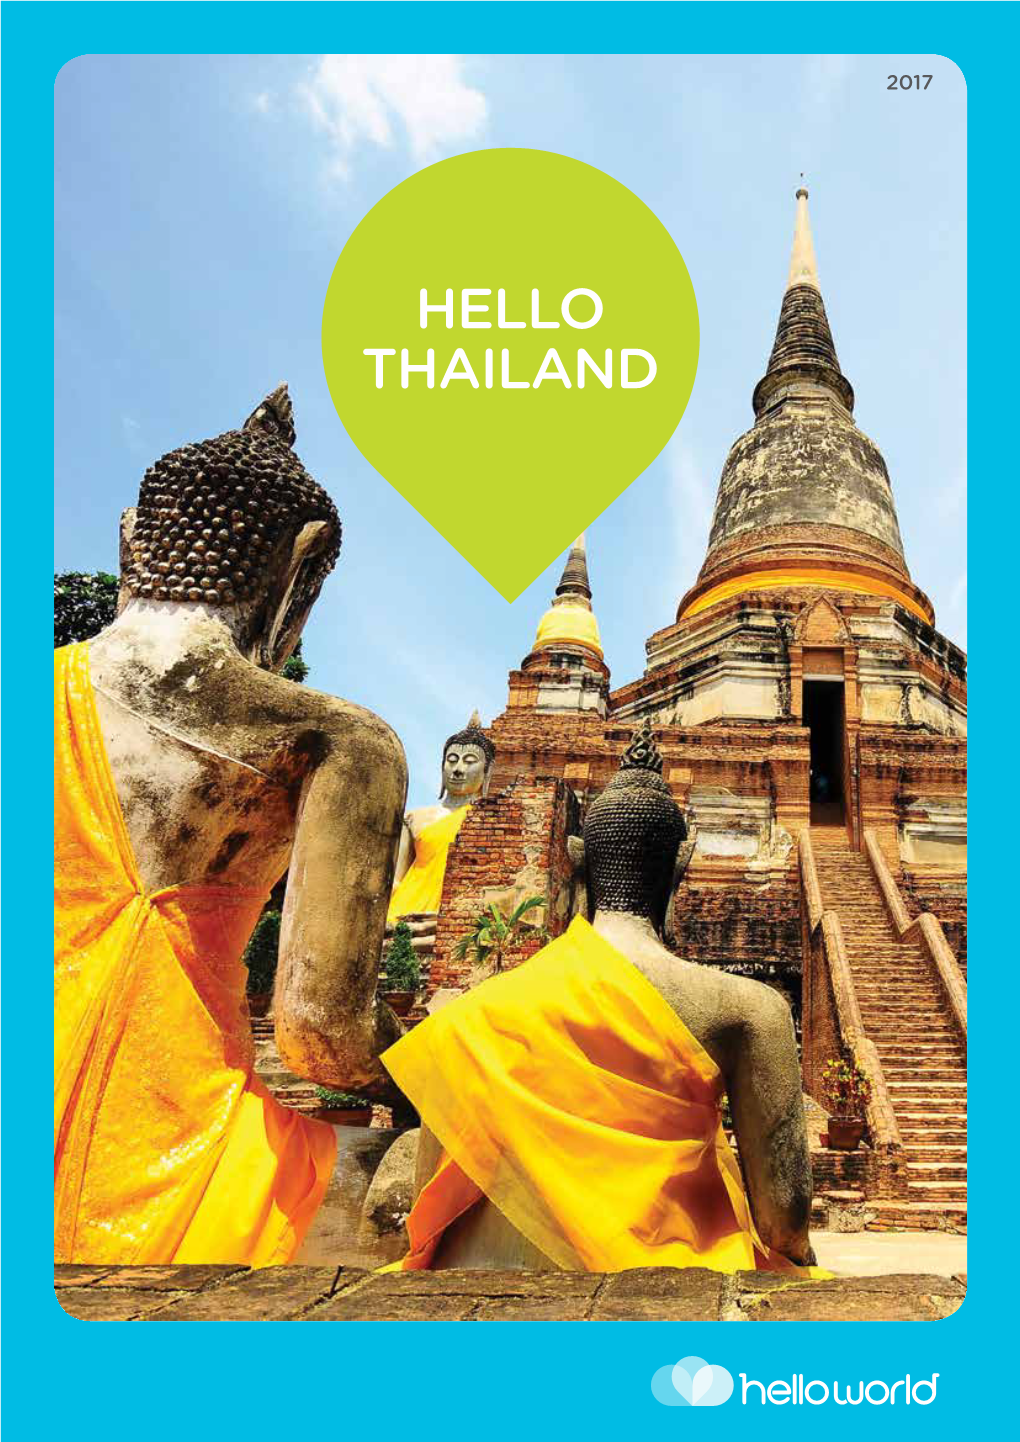 HELLO THAILAND Helloworld Is a Fresh New Travel Brand with a Long and Solid History